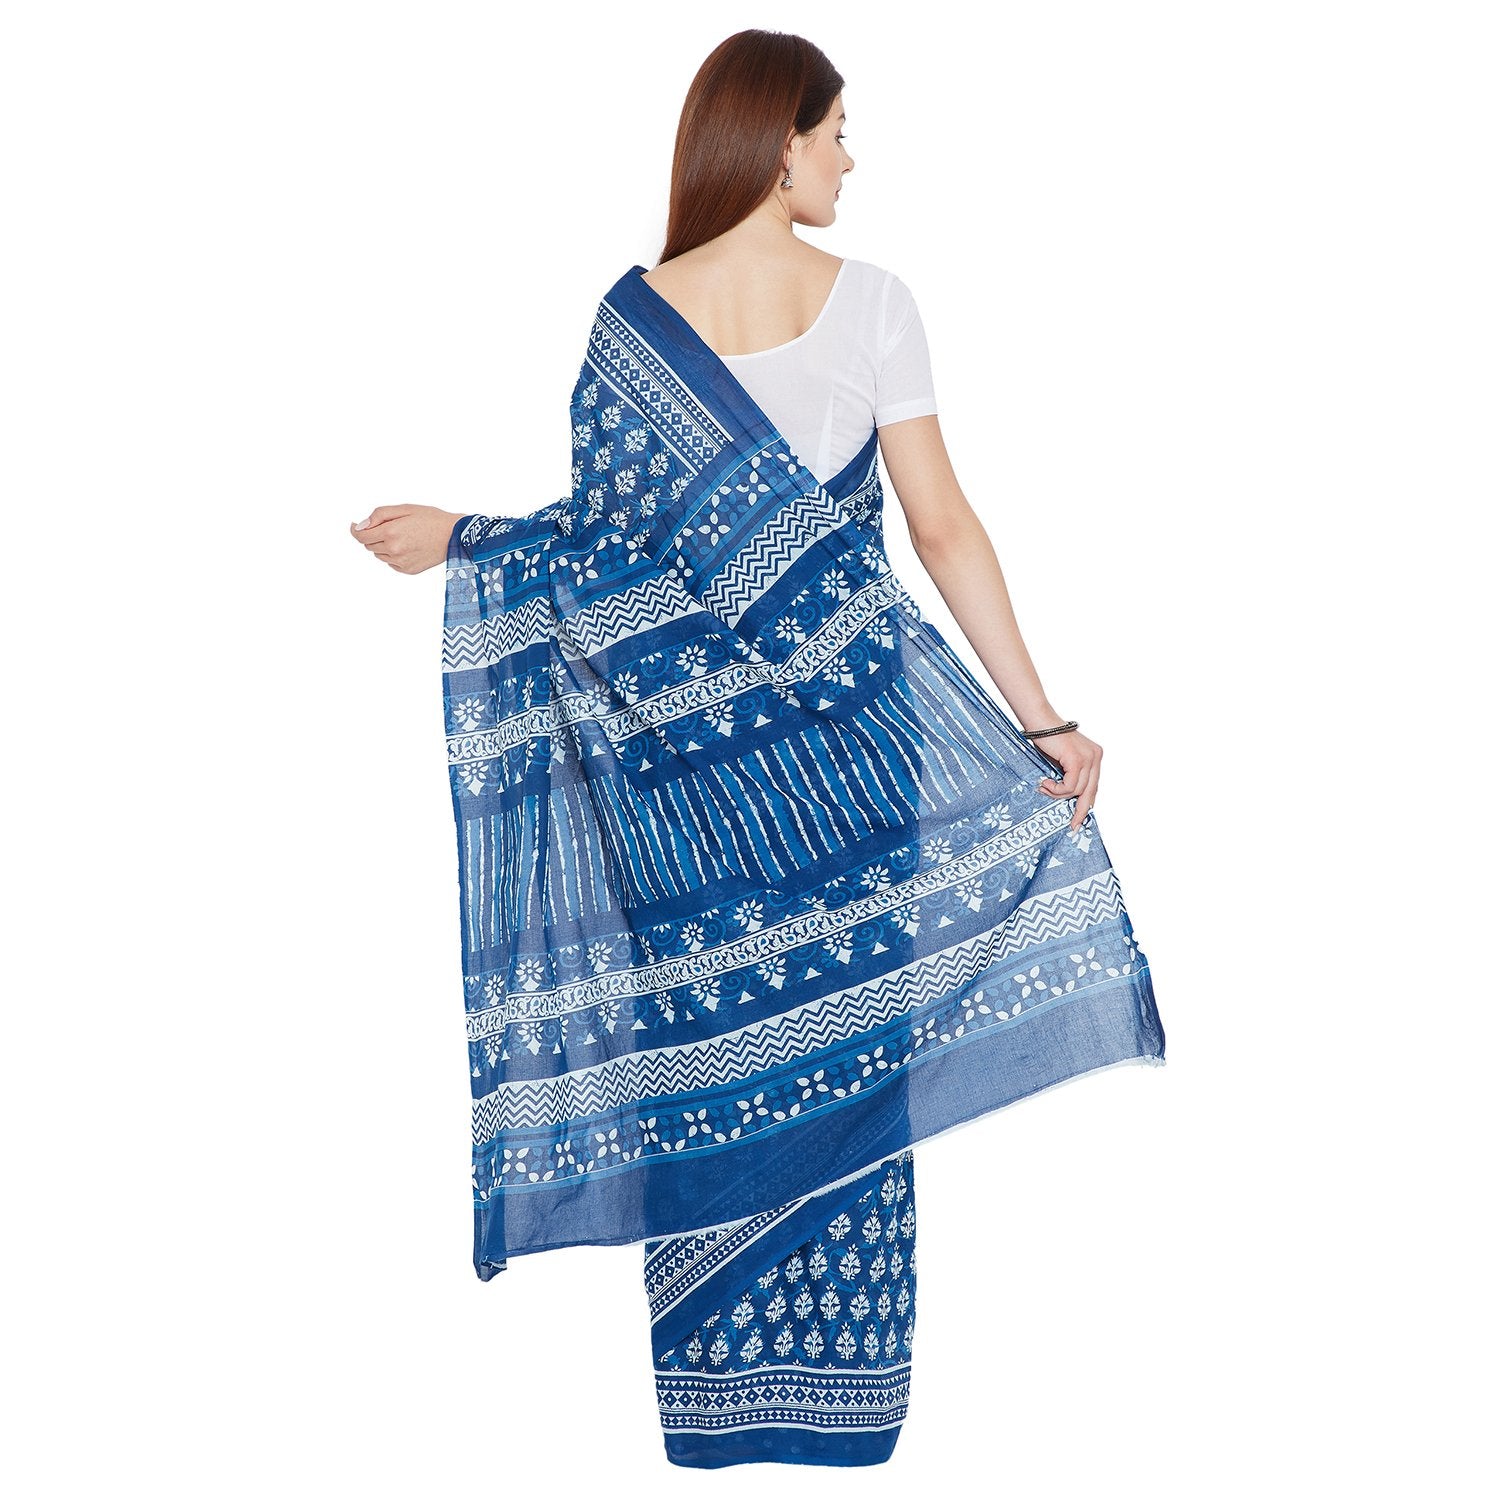 Blue Indigo Screen Print Handcrafted Cotton Saree-Saree-Kalakari India-RDSNSA0111-Cotton, Geographical Indication, Hand Blocks, Hand Crafted, Heritage Prints, Indigo, Sarees, Screen Print, Sustainable Fabrics-[Linen,Ethnic,wear,Fashionista,Handloom,Handicraft,Indigo,blockprint,block,print,Cotton,Chanderi,Blue, latest,classy,party,bollywood,trendy,summer,style,traditional,formal,elegant,unique,style,hand,block,print, dabu,booti,gift,present,glamorous,affordable,collectible,Sari,Saree,printed, hol